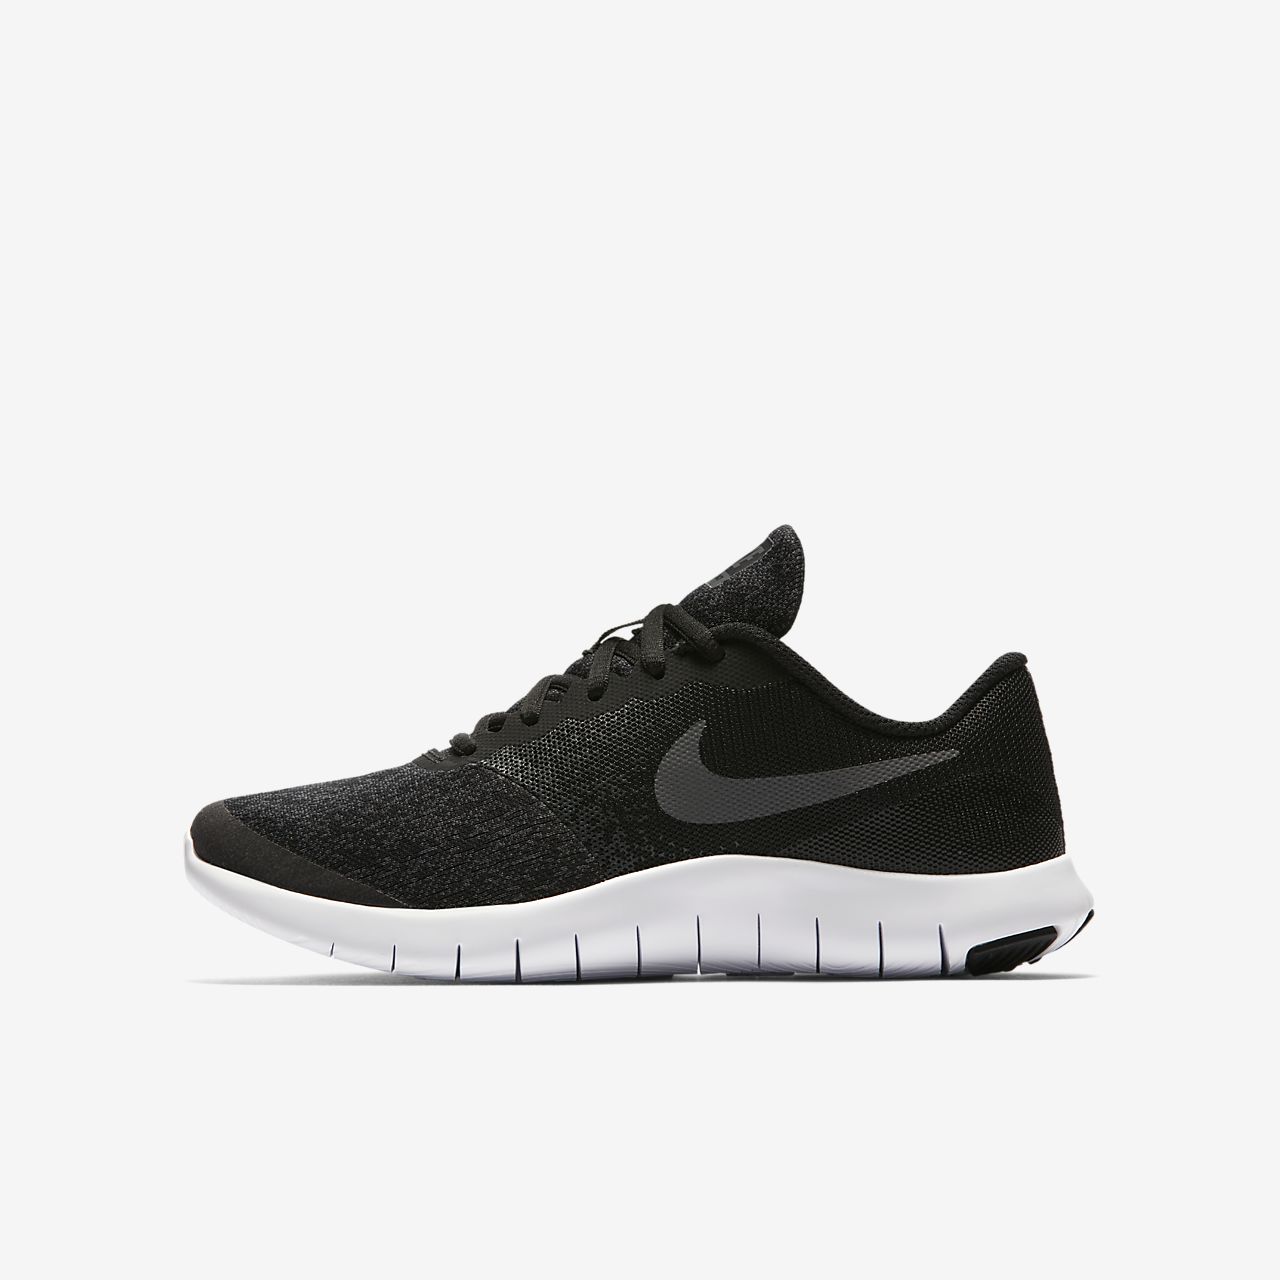 nike flex contact women's running shoes black and white